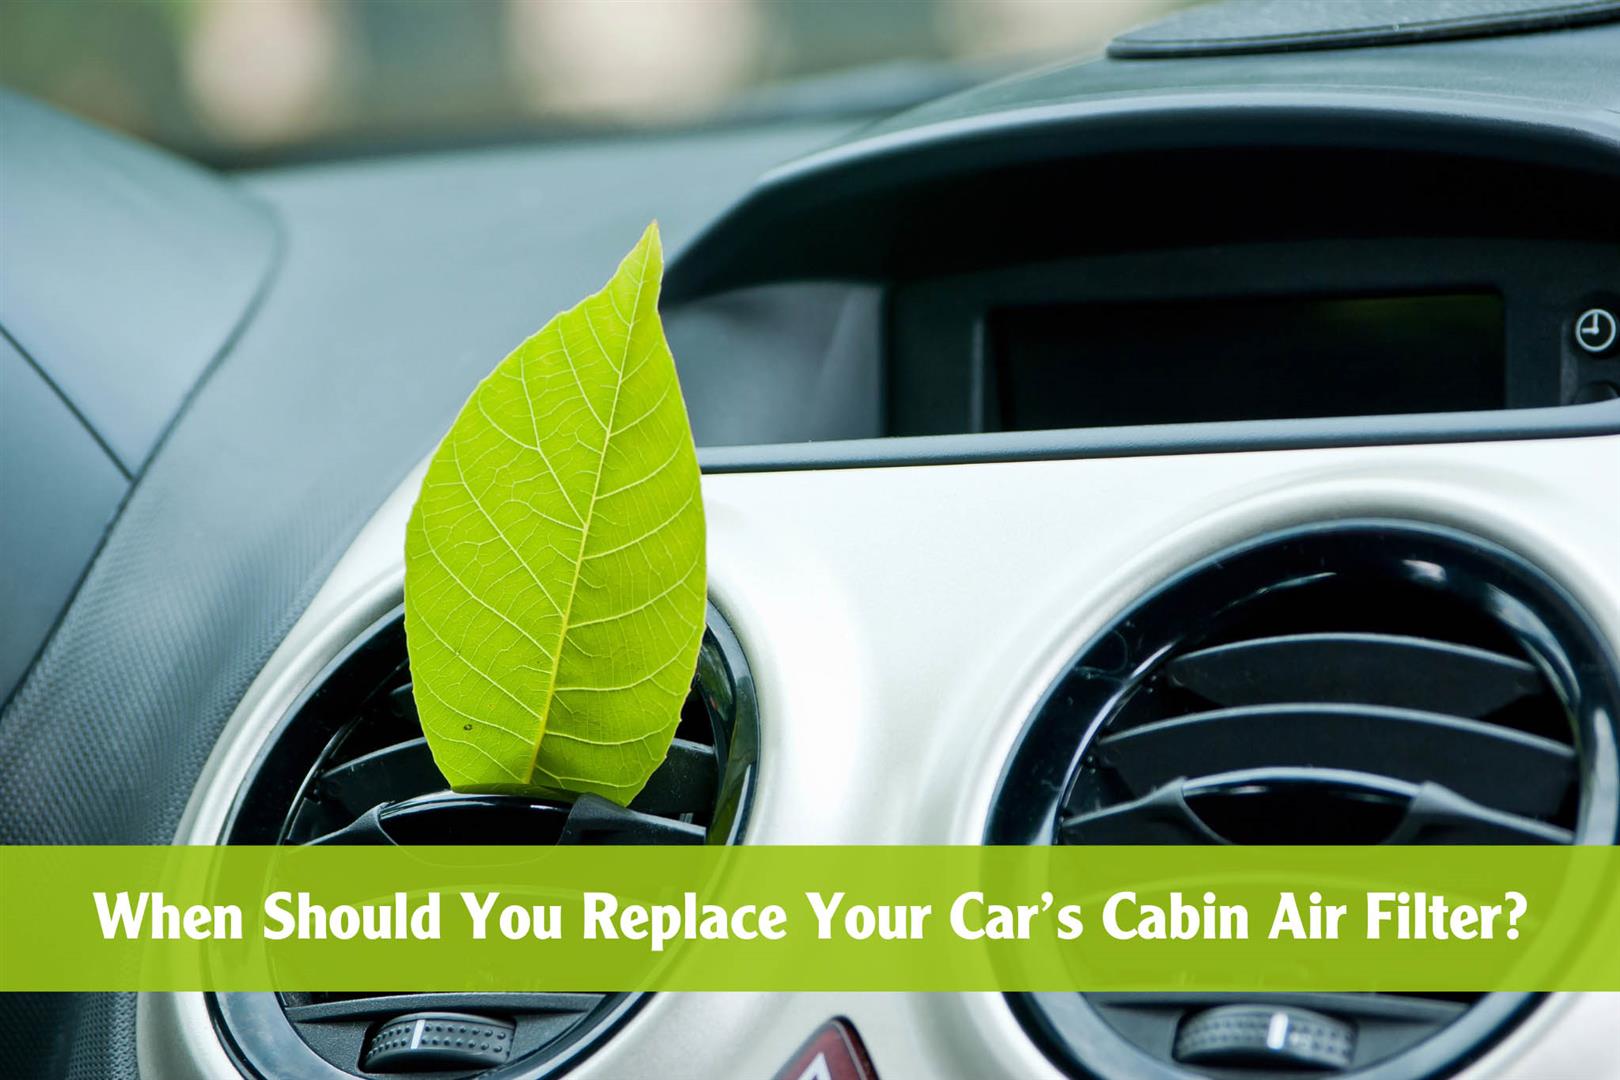 When Should You Replace Your Car’s Cabin Air Filter?